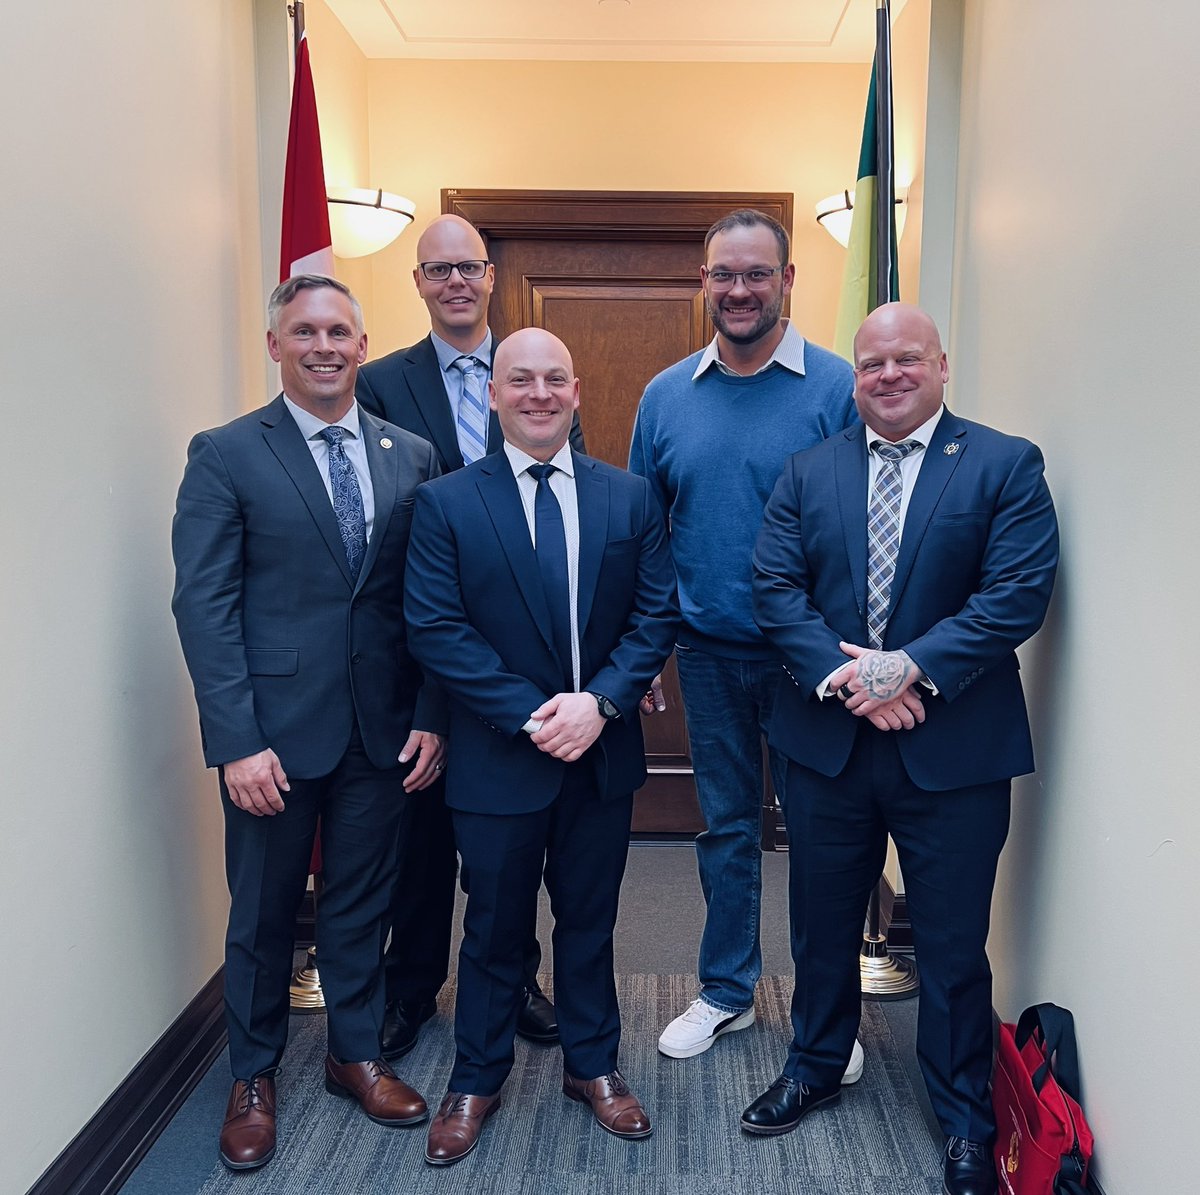 Our executive is in Ottawa this week to meet with politicians to lobby for issues that are not only for our members and their families benefit, but ultimately for what’s best for the community and public safety at large. #iaffcdnleg